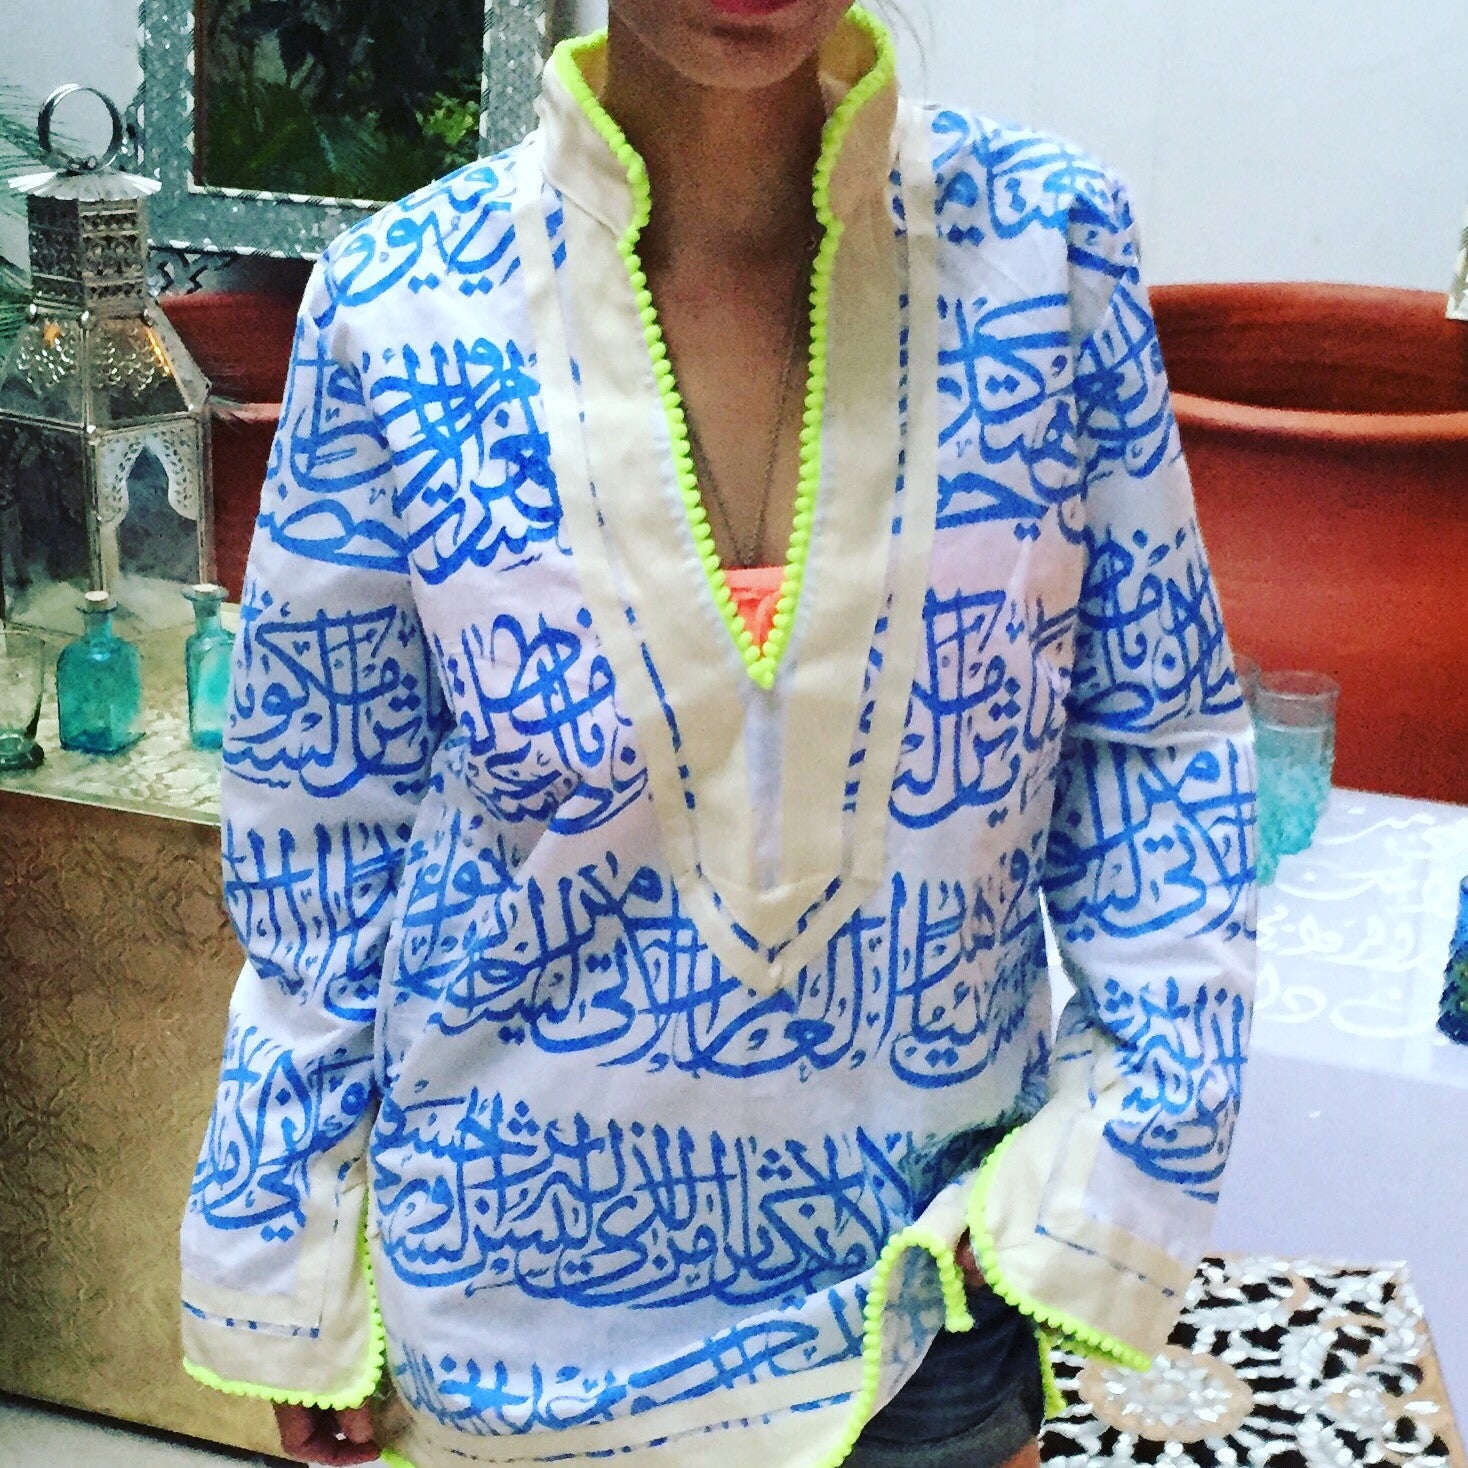 DamascusConcept Tunic, arabic caligraphy, Rumi poem, only breath.